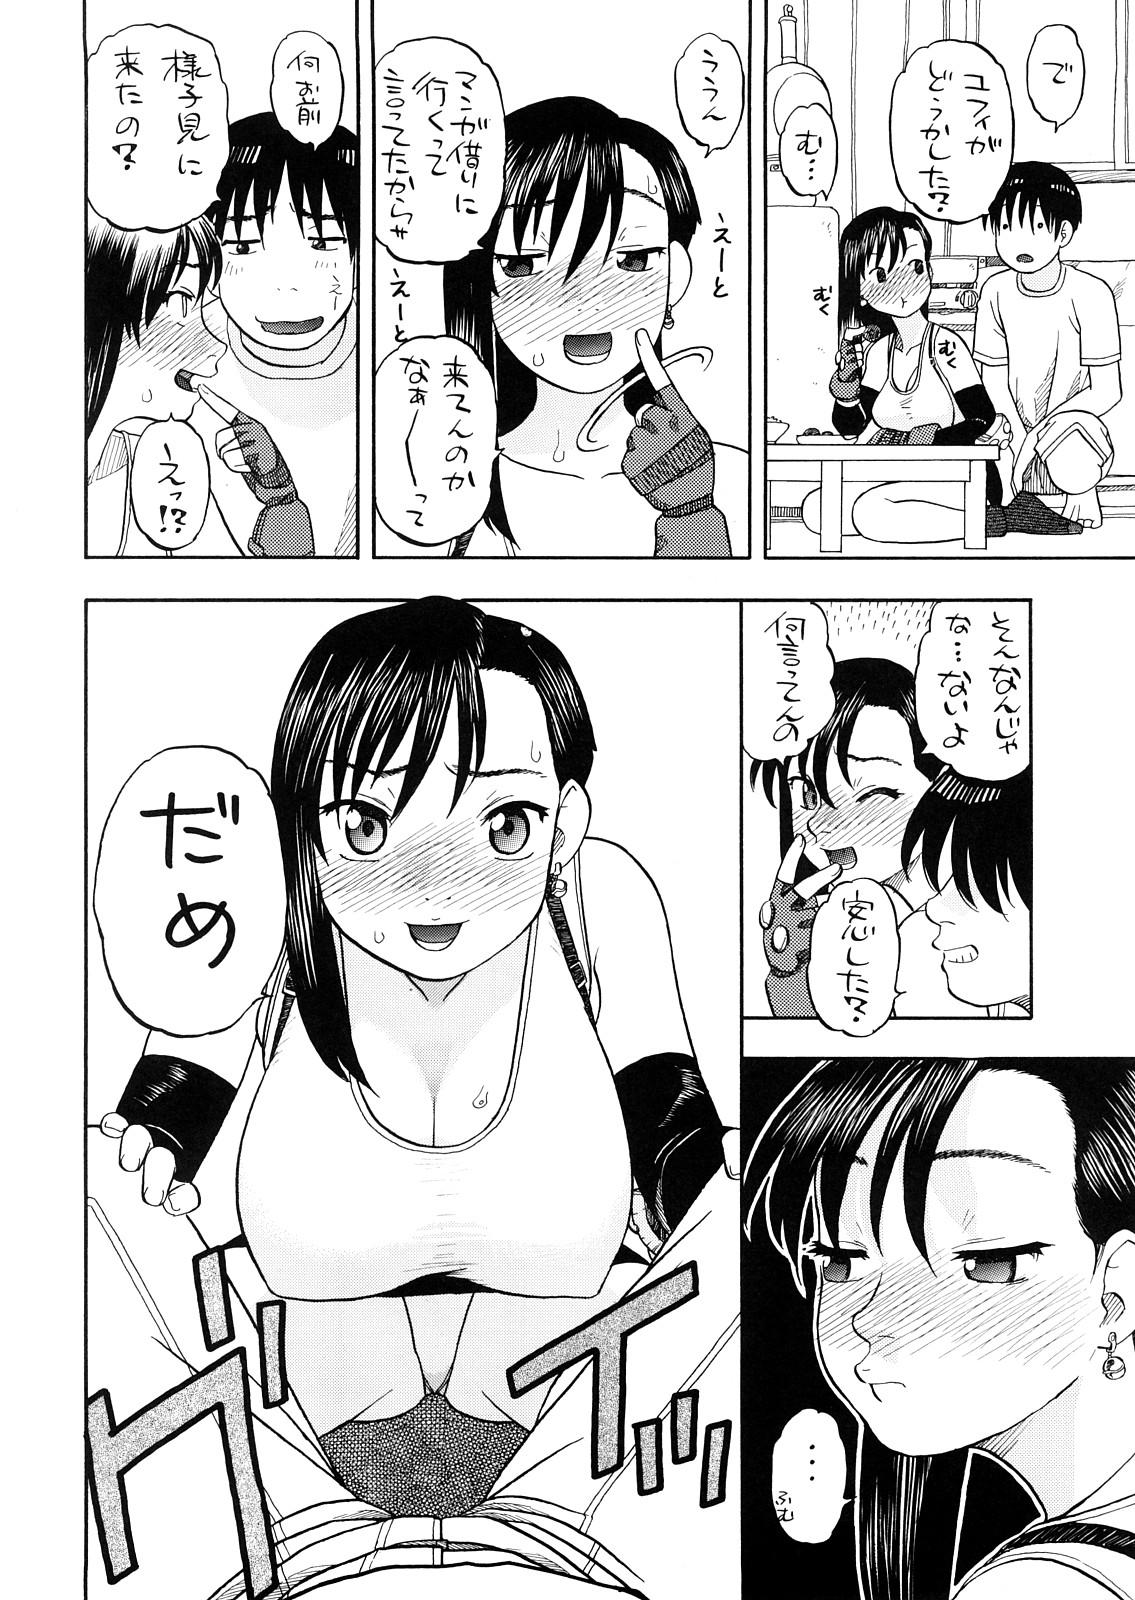 Tifa to Yuffie to Yojouhan 4